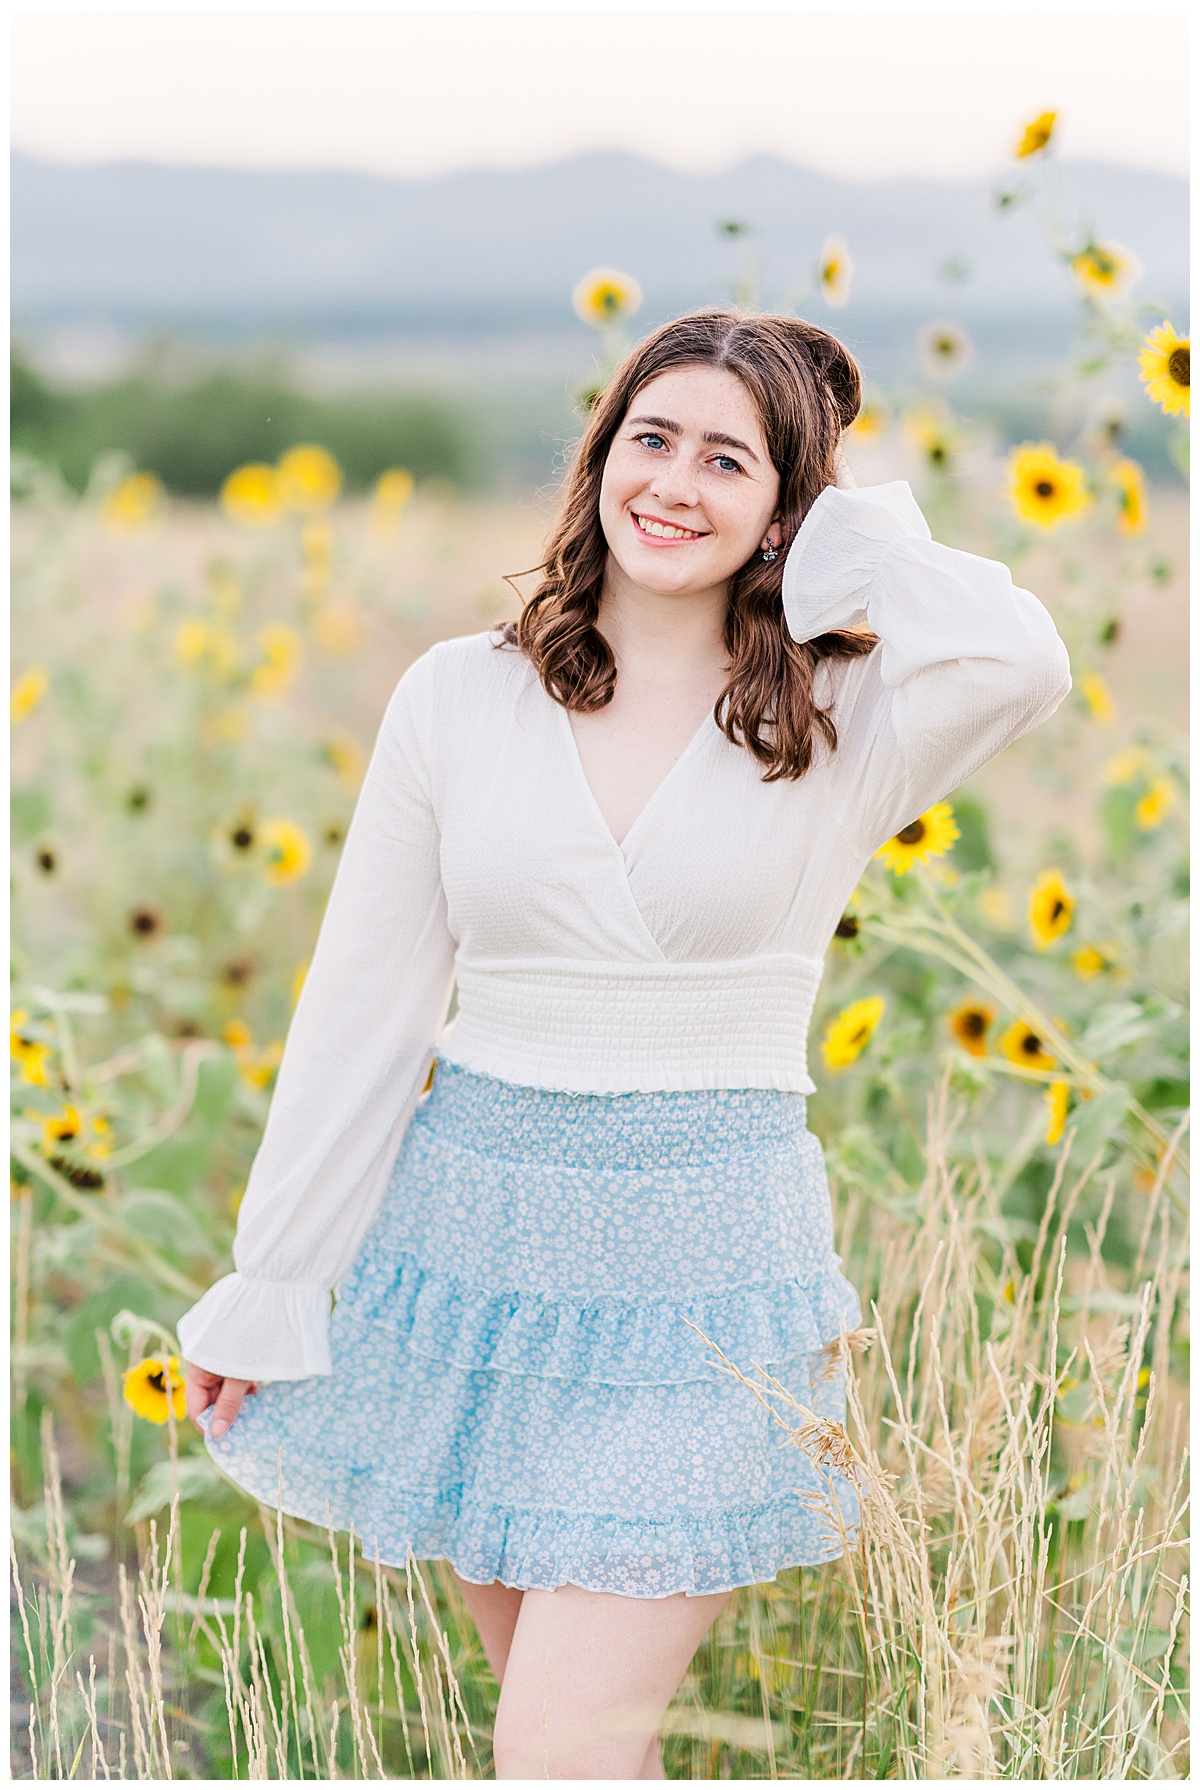 Brown hair girl with white shirt and blue skirt standing in sunflowers